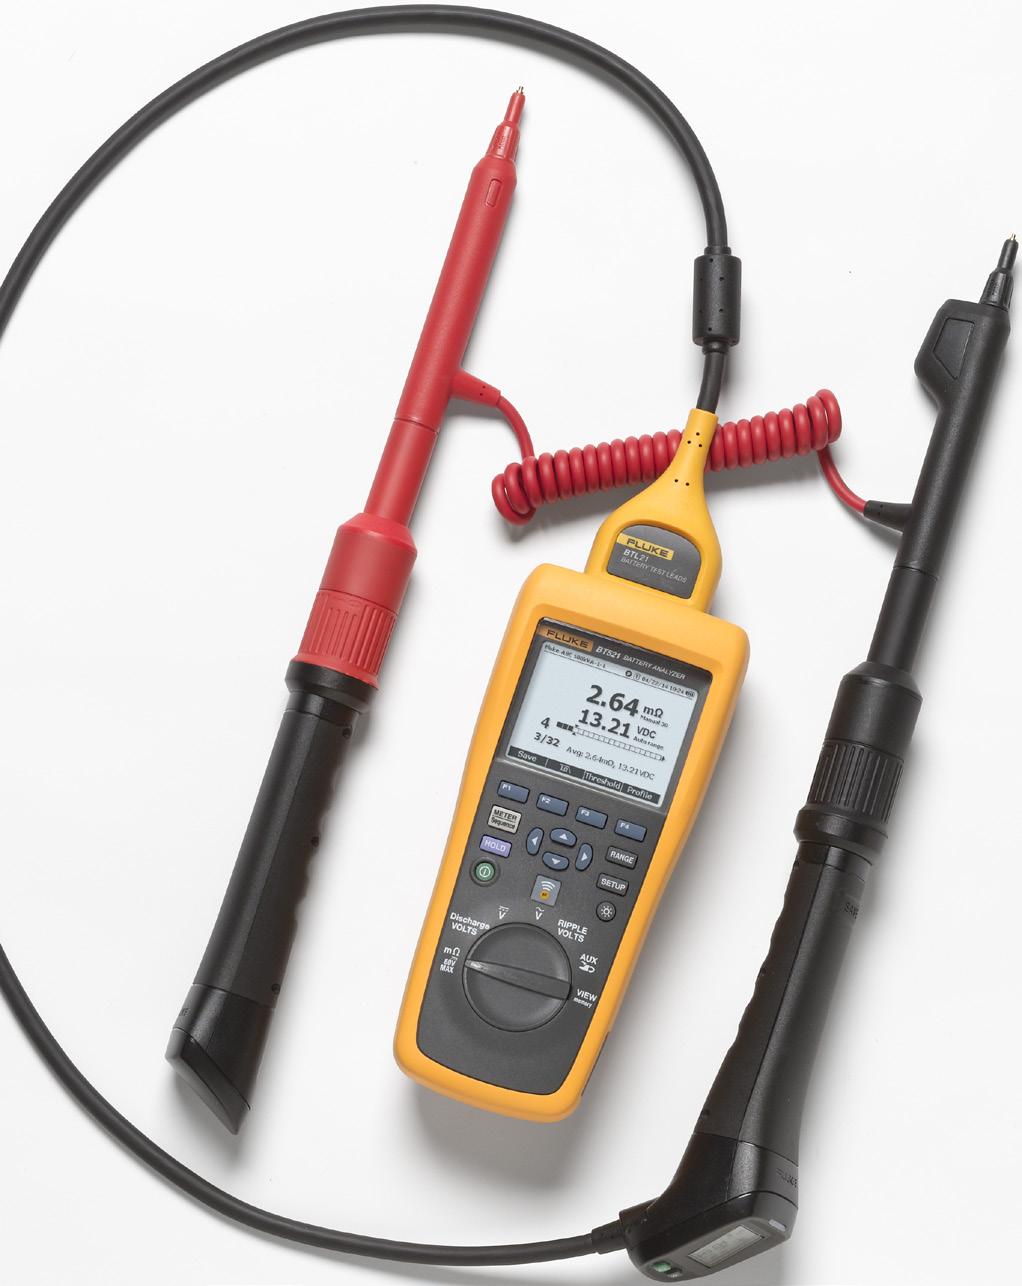 The new Fluke 500 Series Battery Analyzer is ideal test tool for maintenance, troubleshooting and performance testing of individual stationary batteries and battery banks used in critical battery